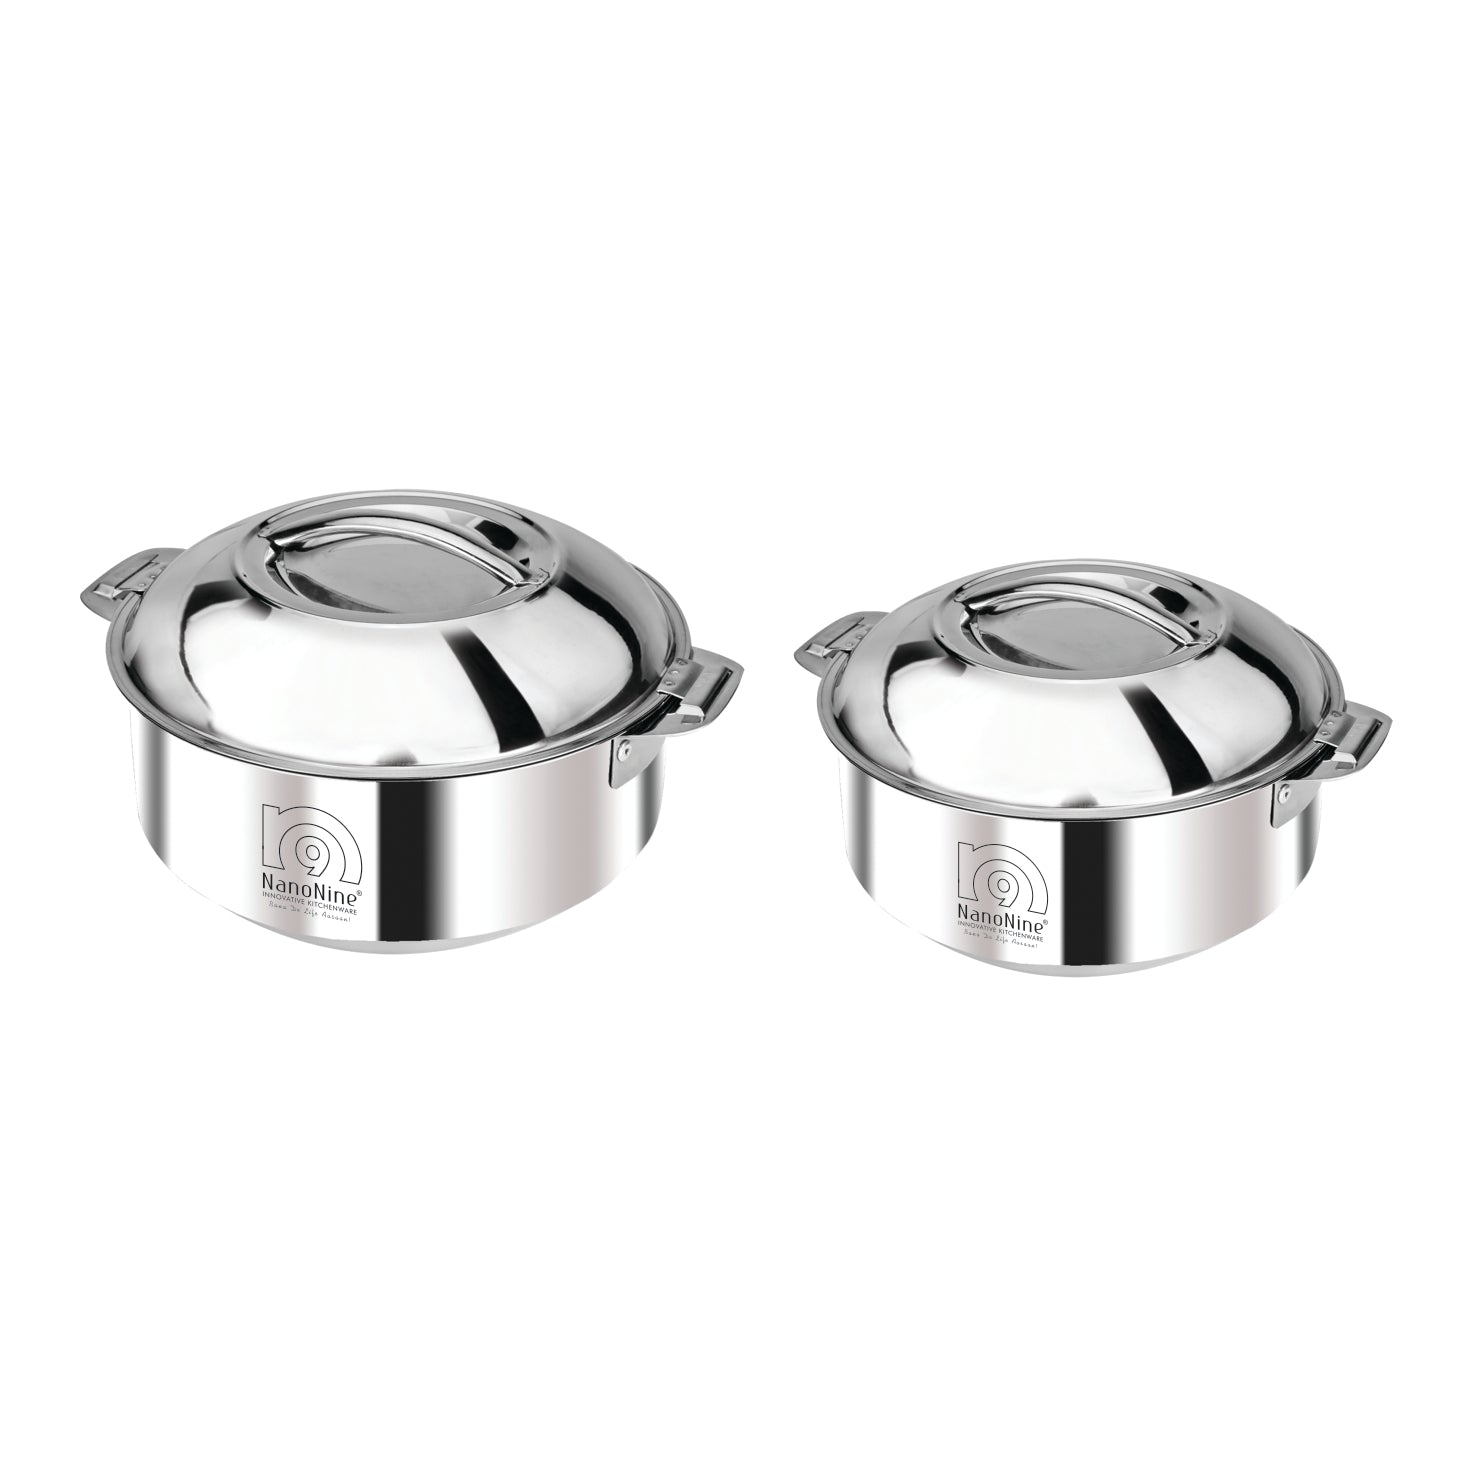 NanoNine Hot Serve 1.4 L + 1.9 L Double Wall Insulated Hot Pot Stainless Steel Casserole with Steel Lid.